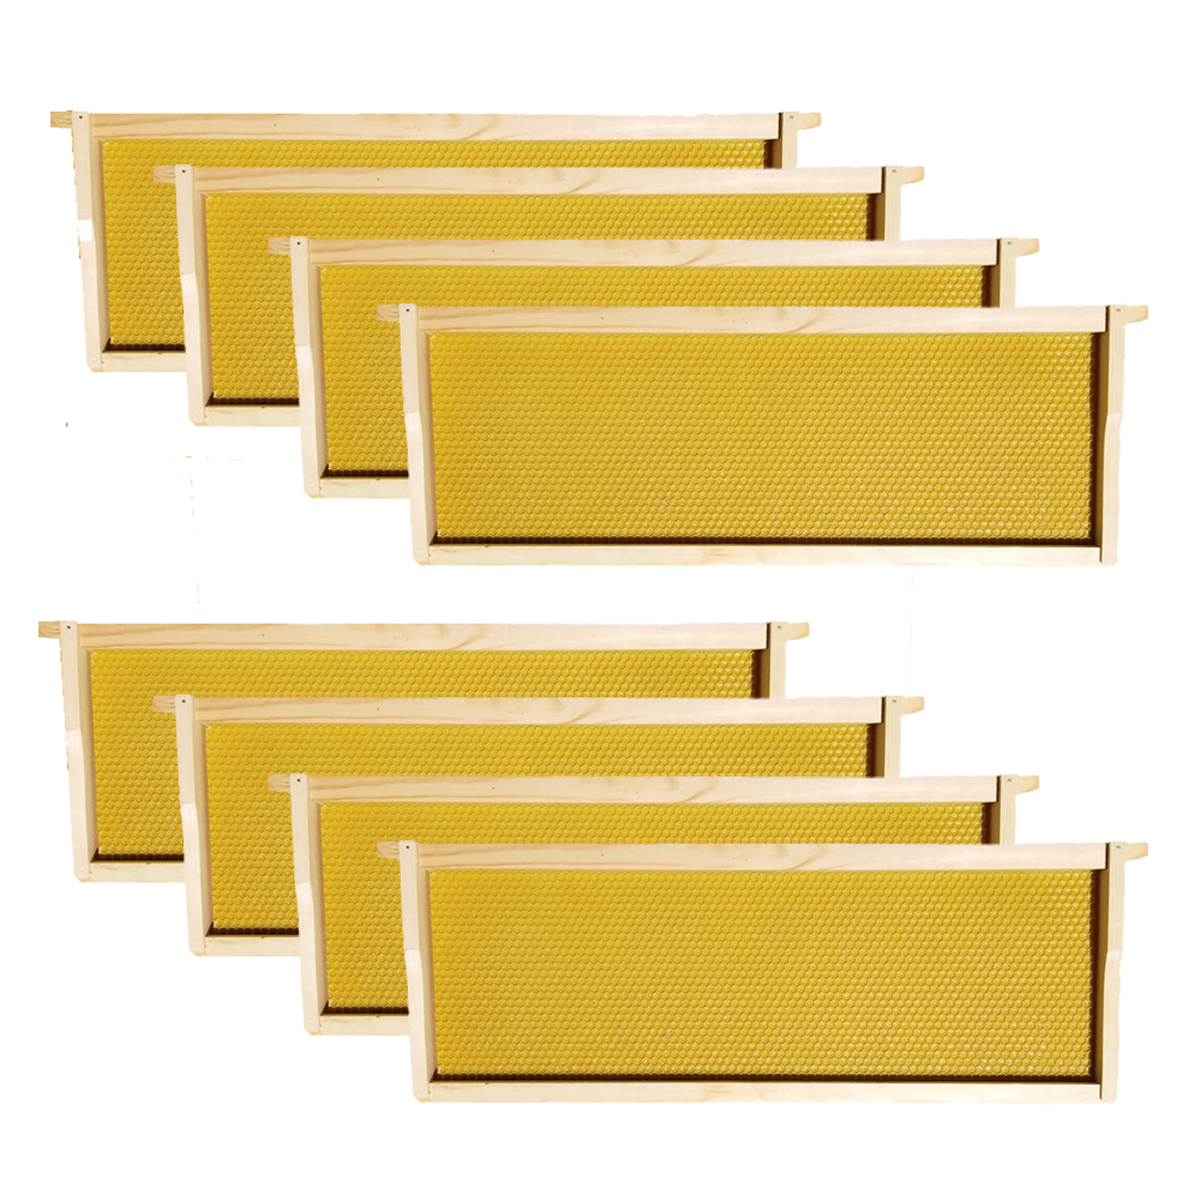 8 Cell Tech Medium Frames With Honey Colored Foundations To Help Inspect Honey In Cells